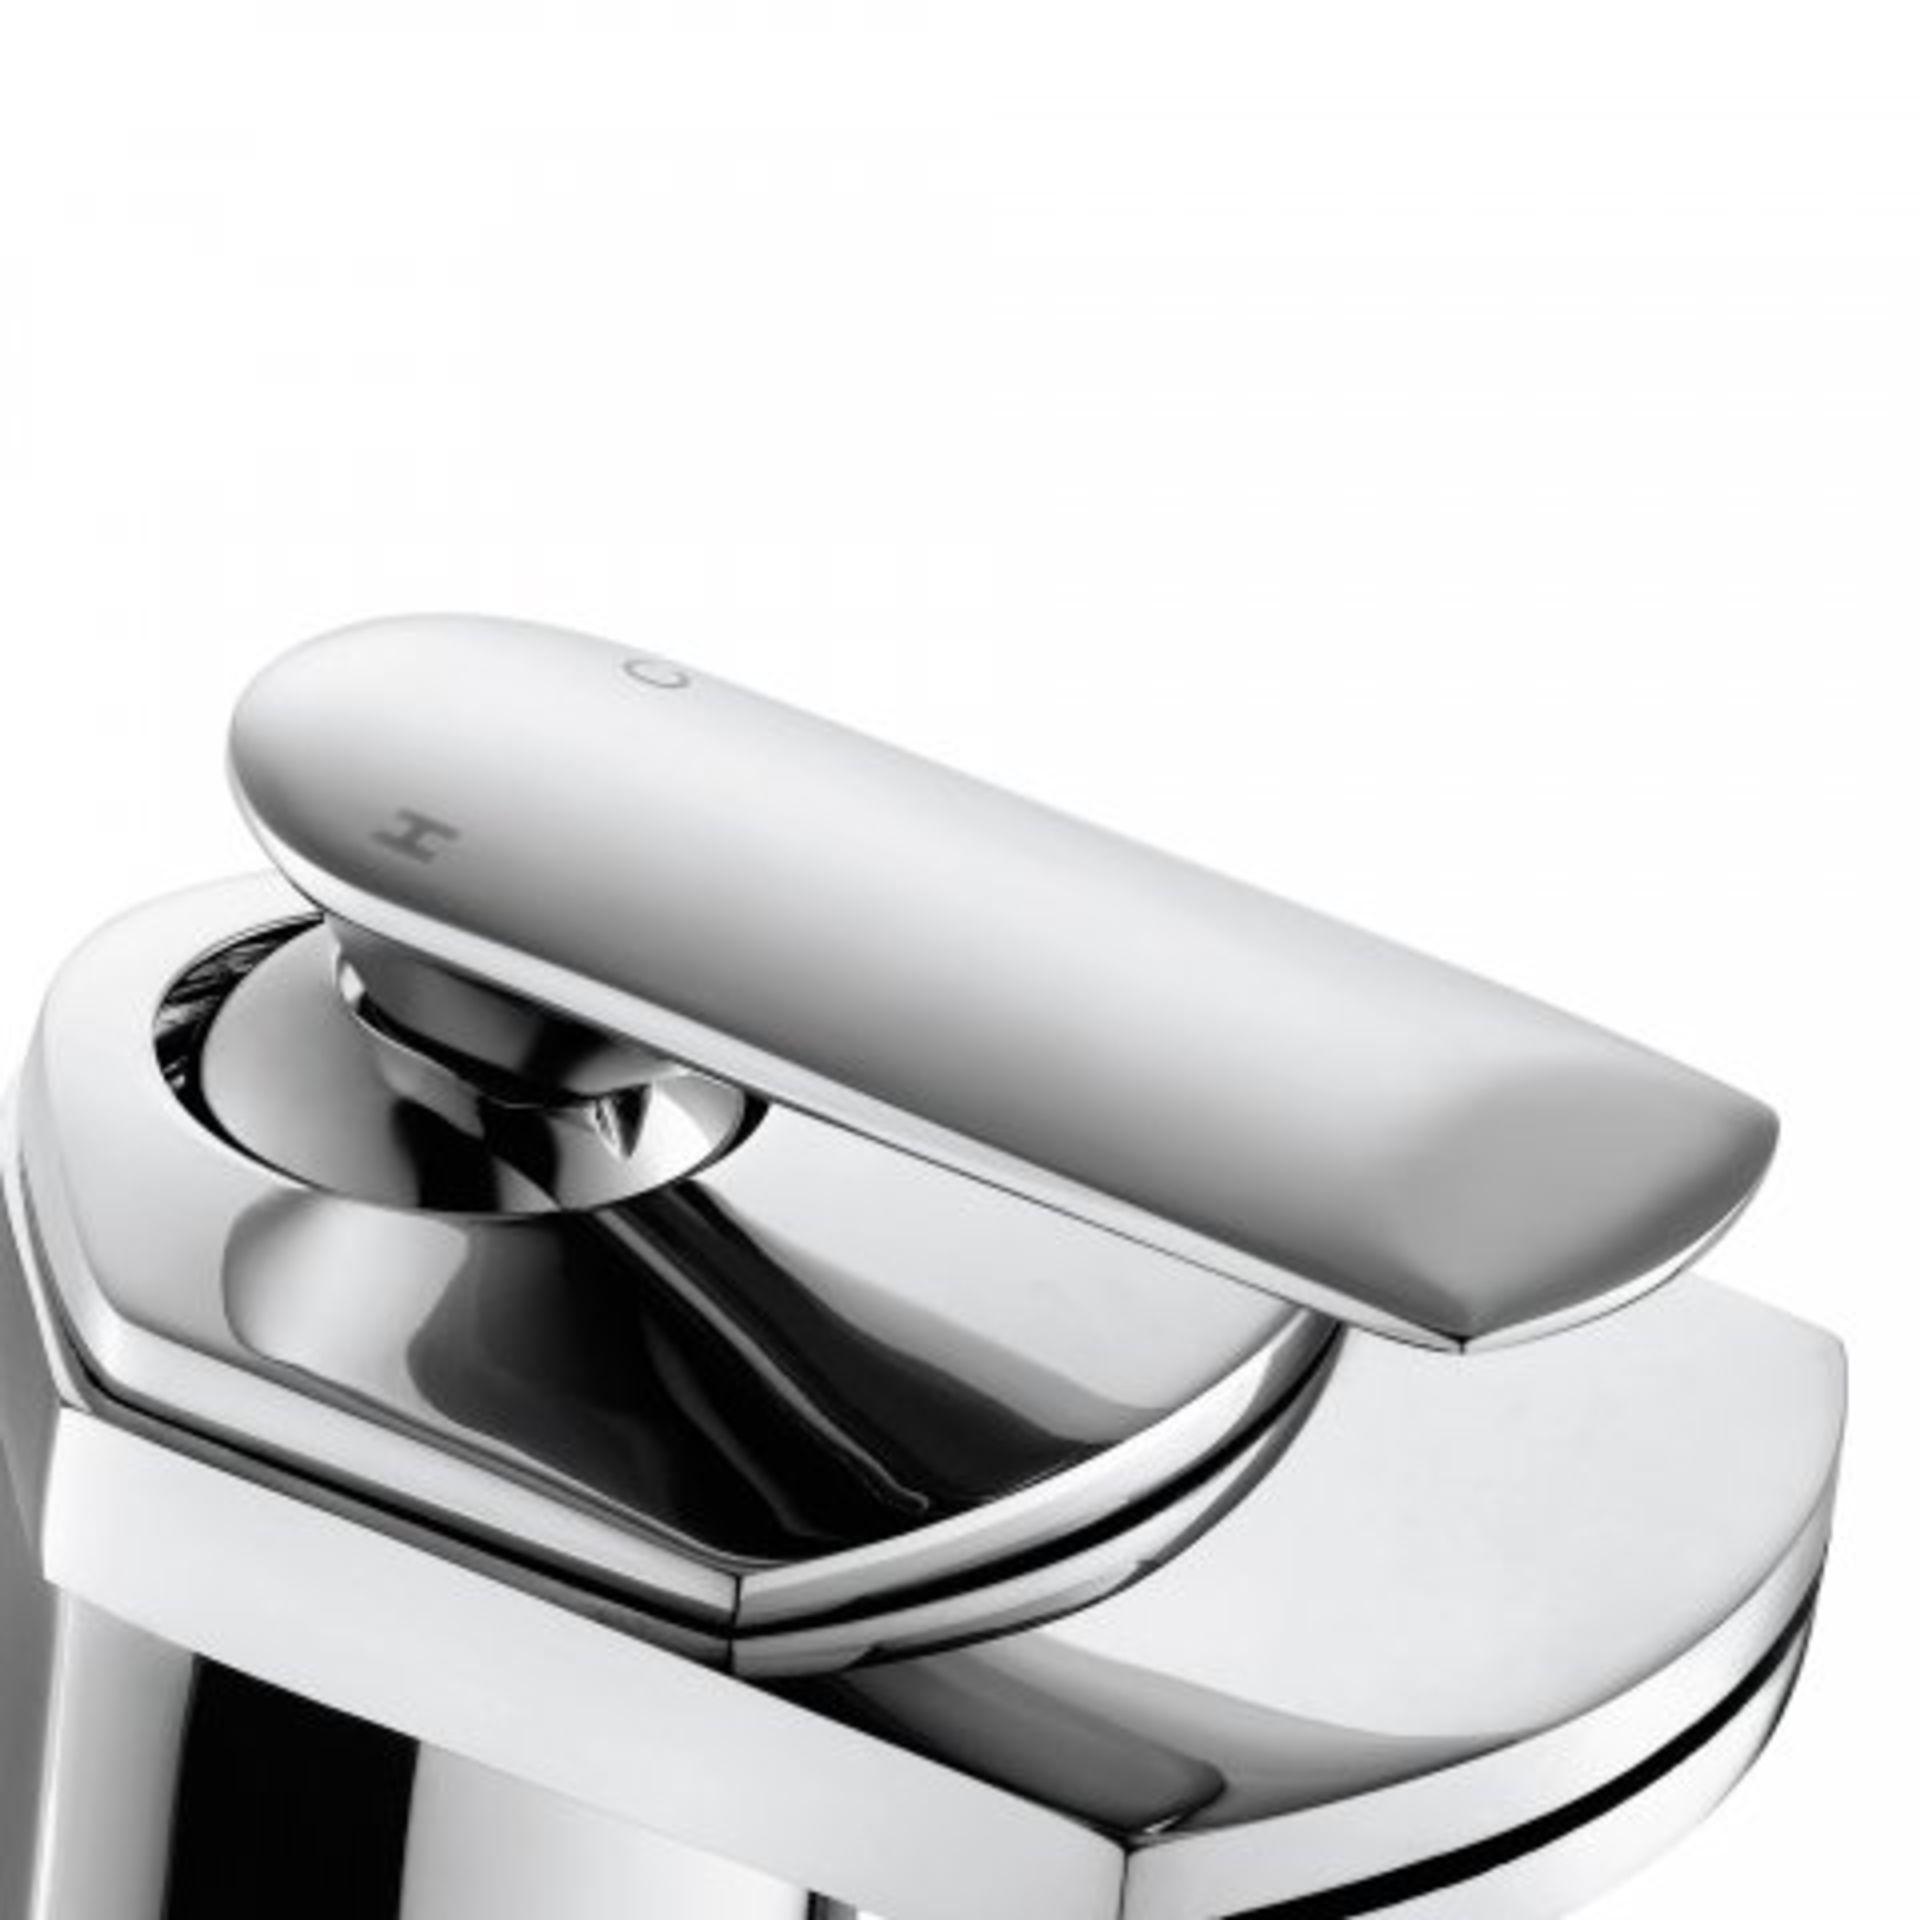 (I99) Oshi Waterfall Basin Mixer Tap Assured Performance Maintenance free technology is incorporated - Image 4 of 5